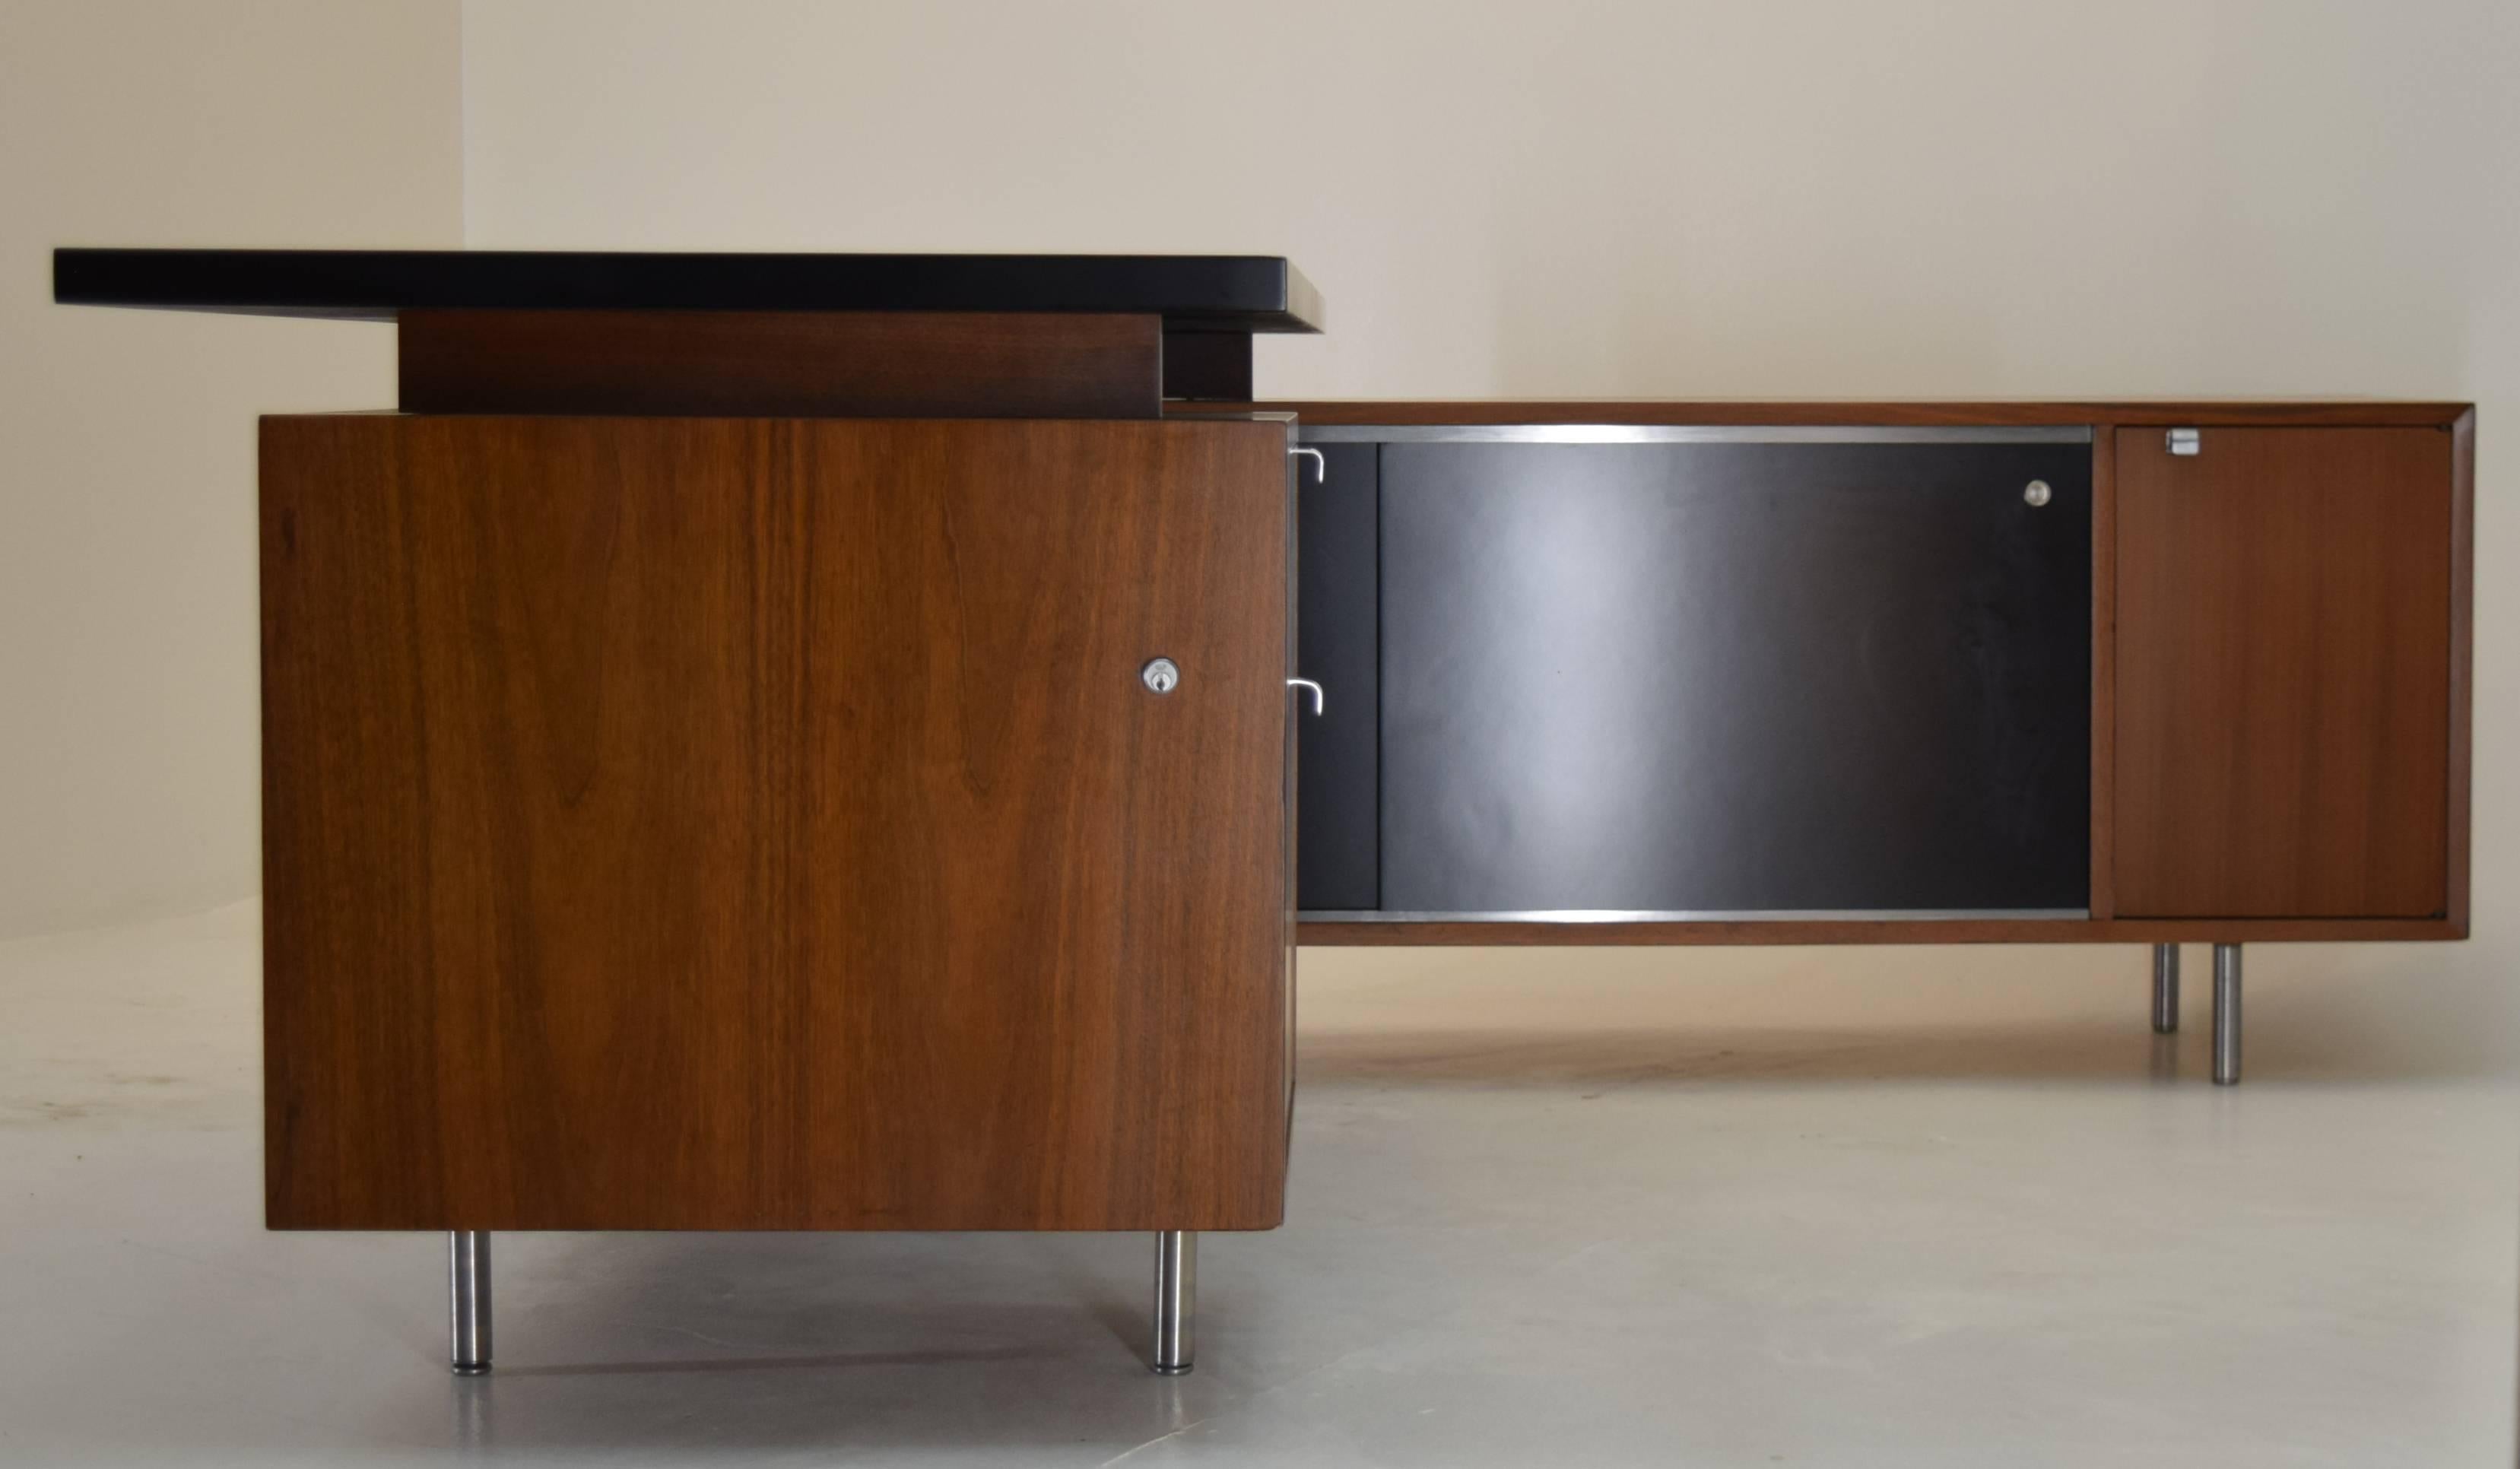 George Nelson, Herman Miller, Executive Office Group Series
circa 1955
Walnut, lacquer, steel, maple
J-Pull knob finger pulls, round legs with feet.
Measures: 72